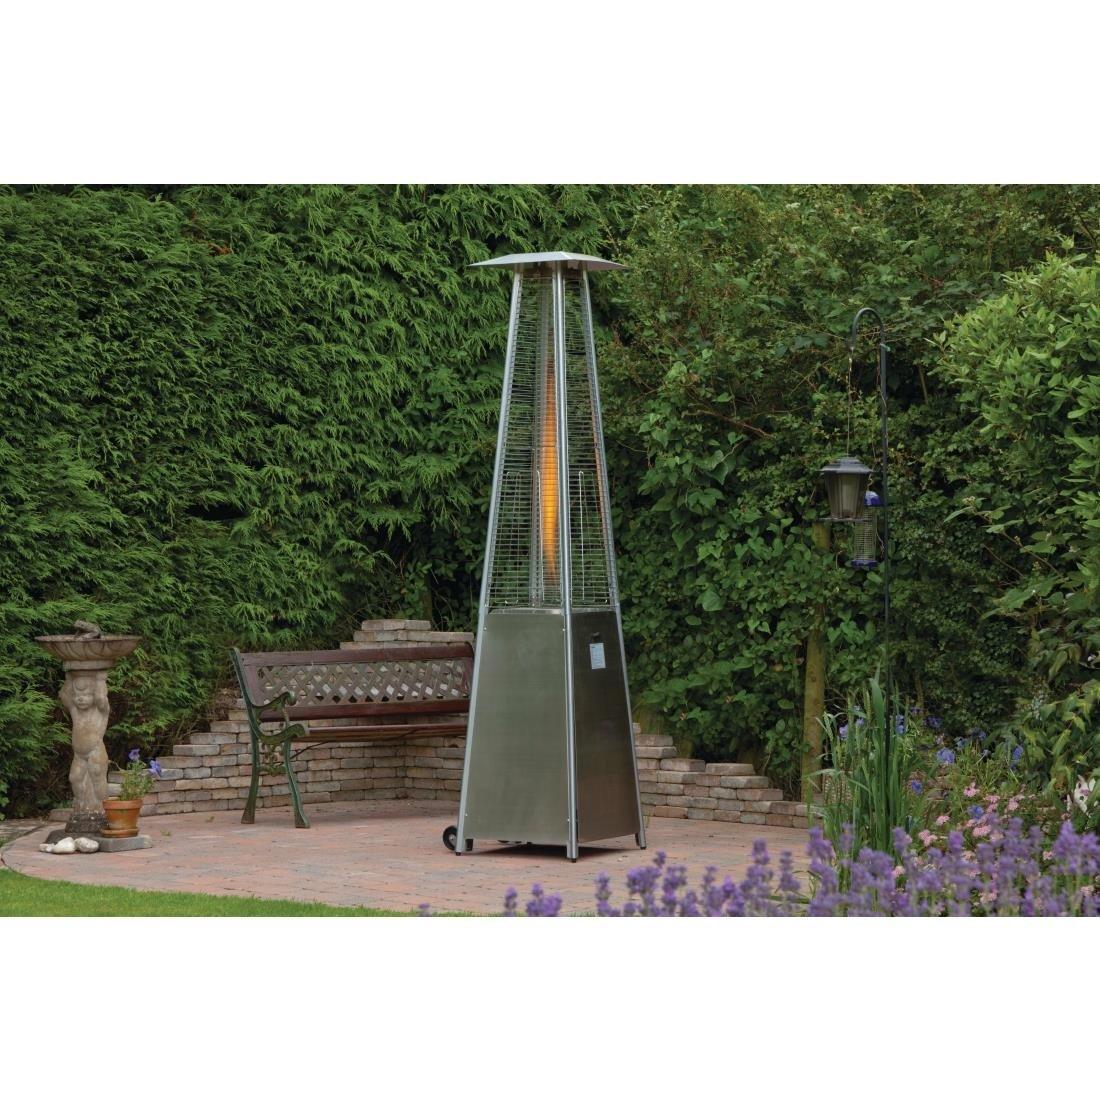 Lifestyle Tahiti Flame Stainless Steel Patio Heater 13kW - Each - CL467 - 2